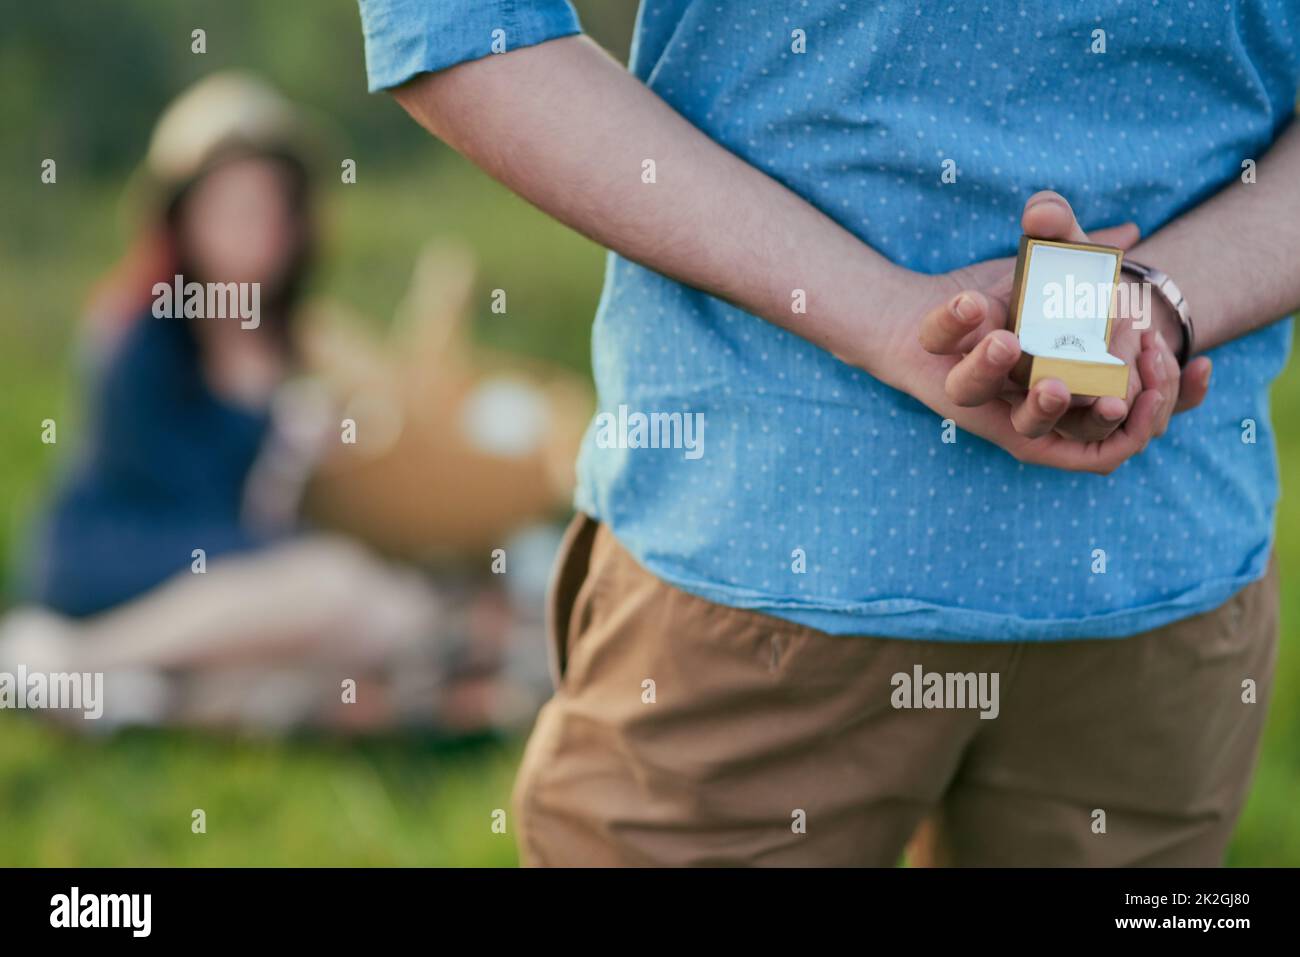 Hes about to mark his eternal love for her. Rear view shot of a man about to propose to his girlfriend with an engagement ring in a box. Stock Photo